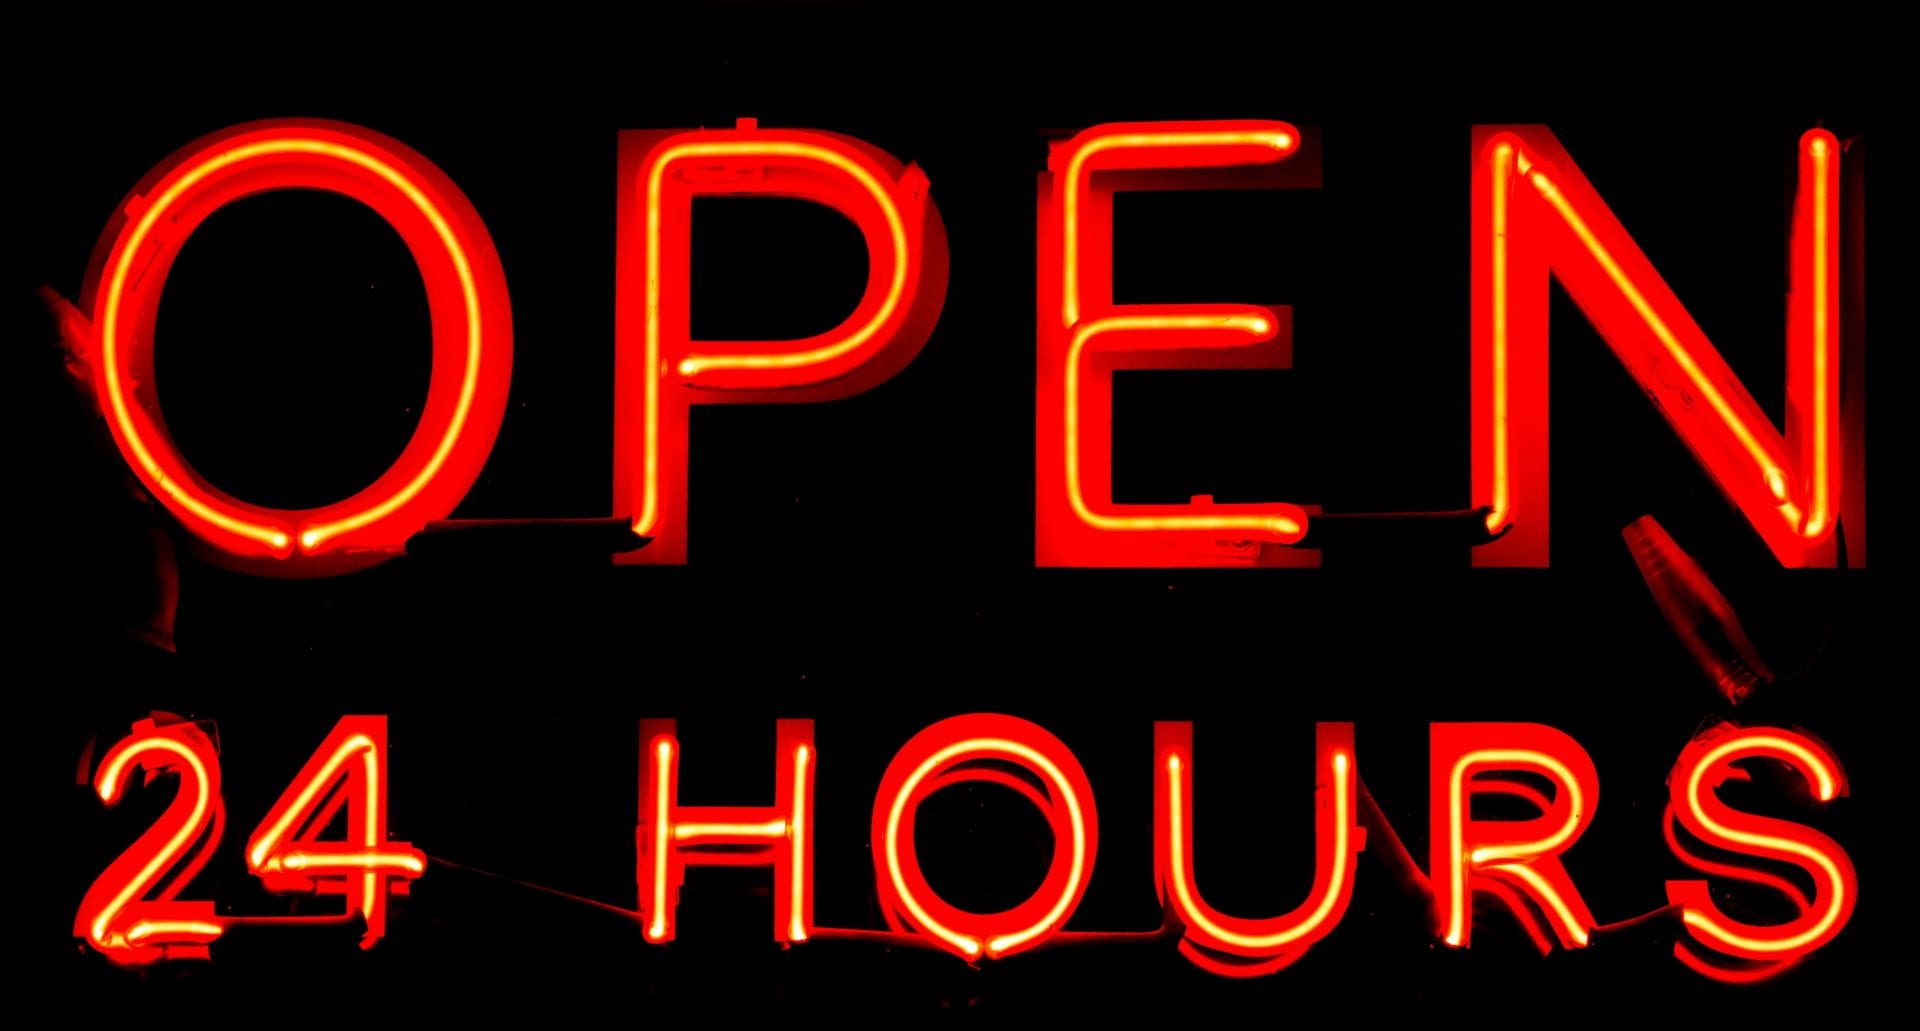 Open 24 hours graphic, red text on black background.